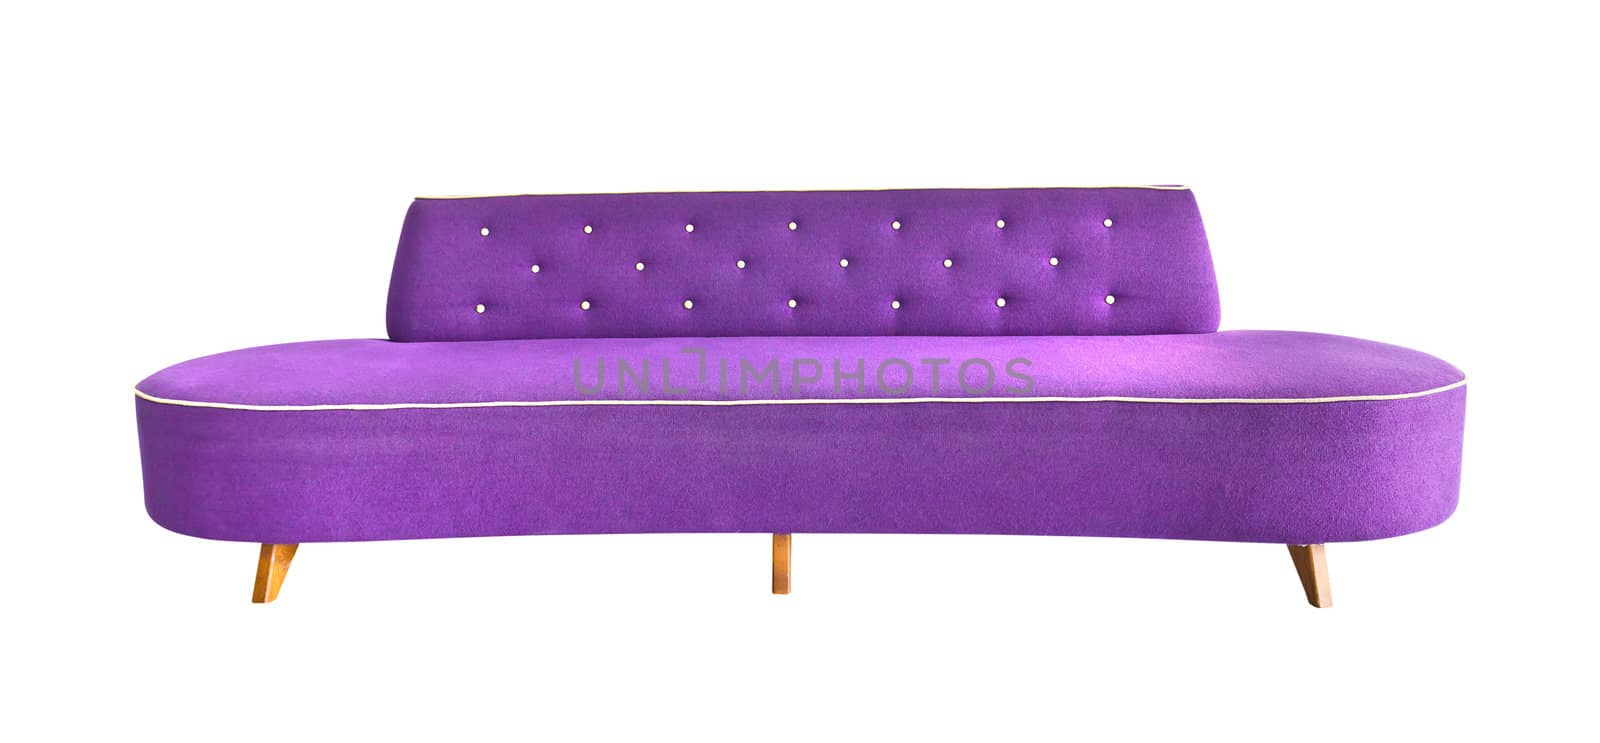 purple sofa isolated with clipping path by tungphoto